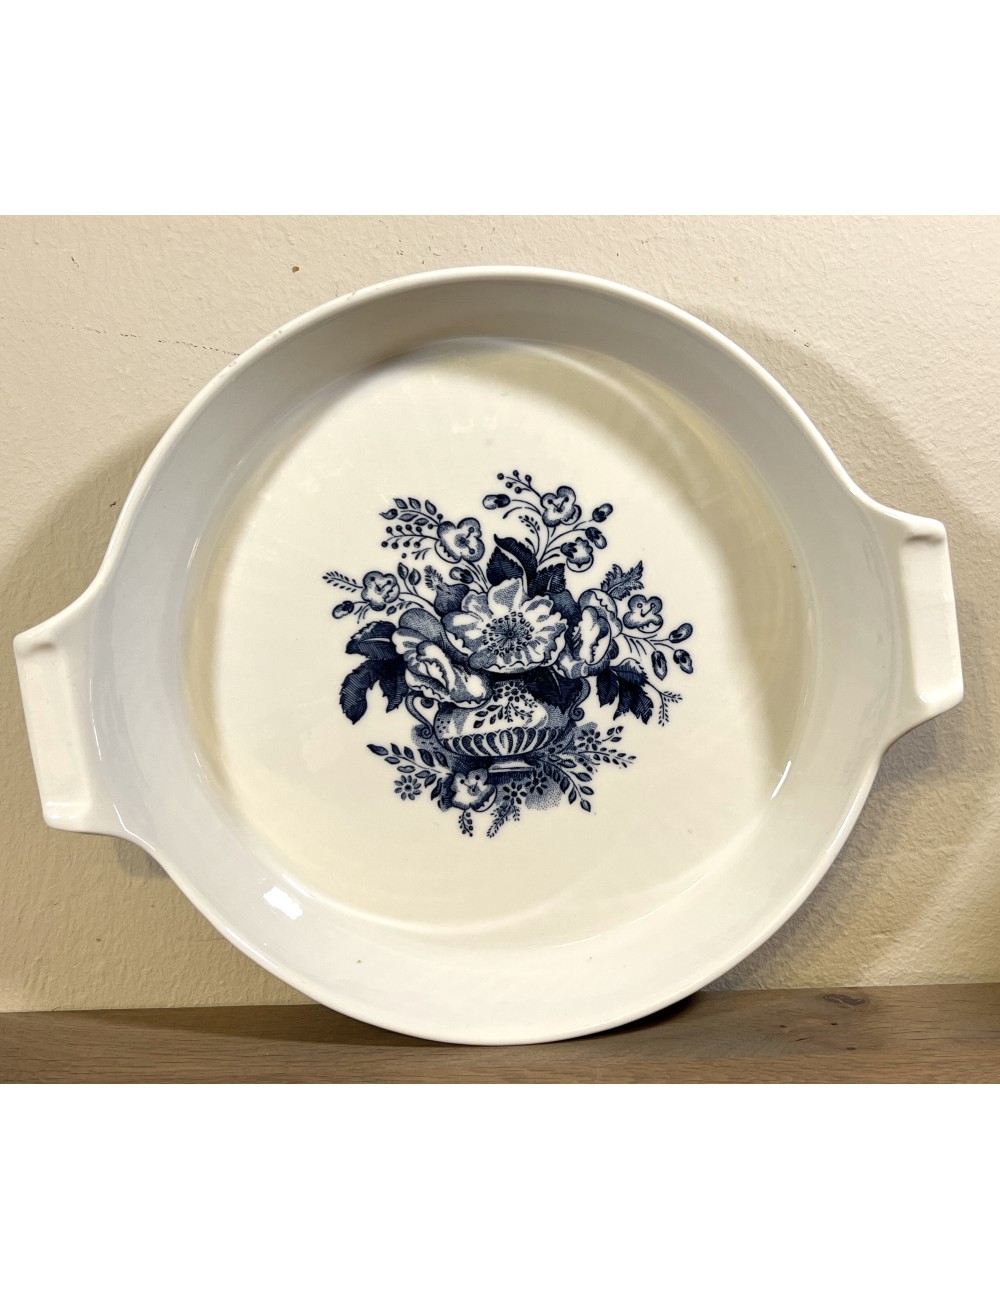 Ovenware bowl - low model with ears - Royal Spinx - décor BALMORAL in blue